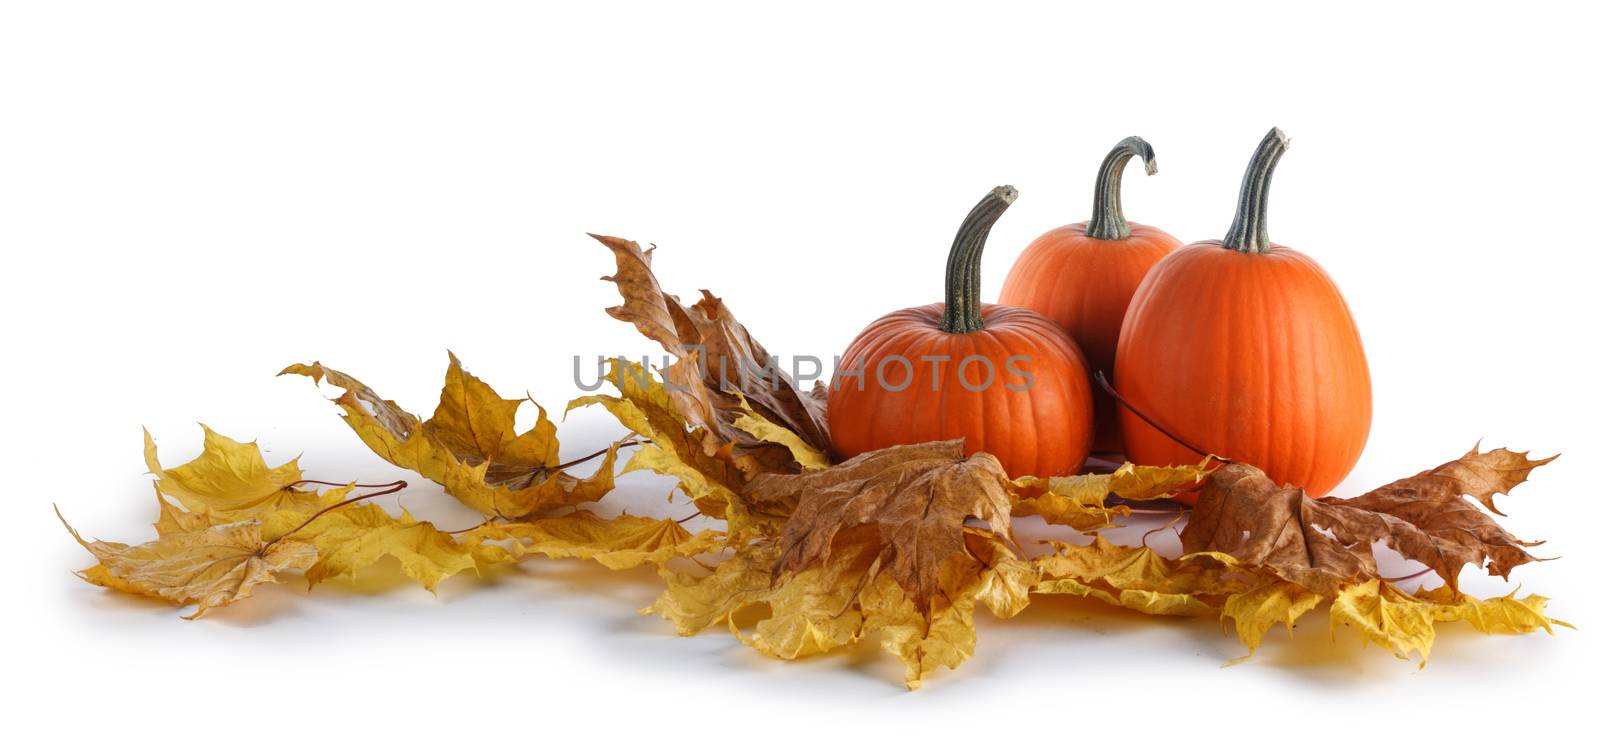 Autumn arrangement of pumpkins with yellow autumn dry maple leaves isolated on white background